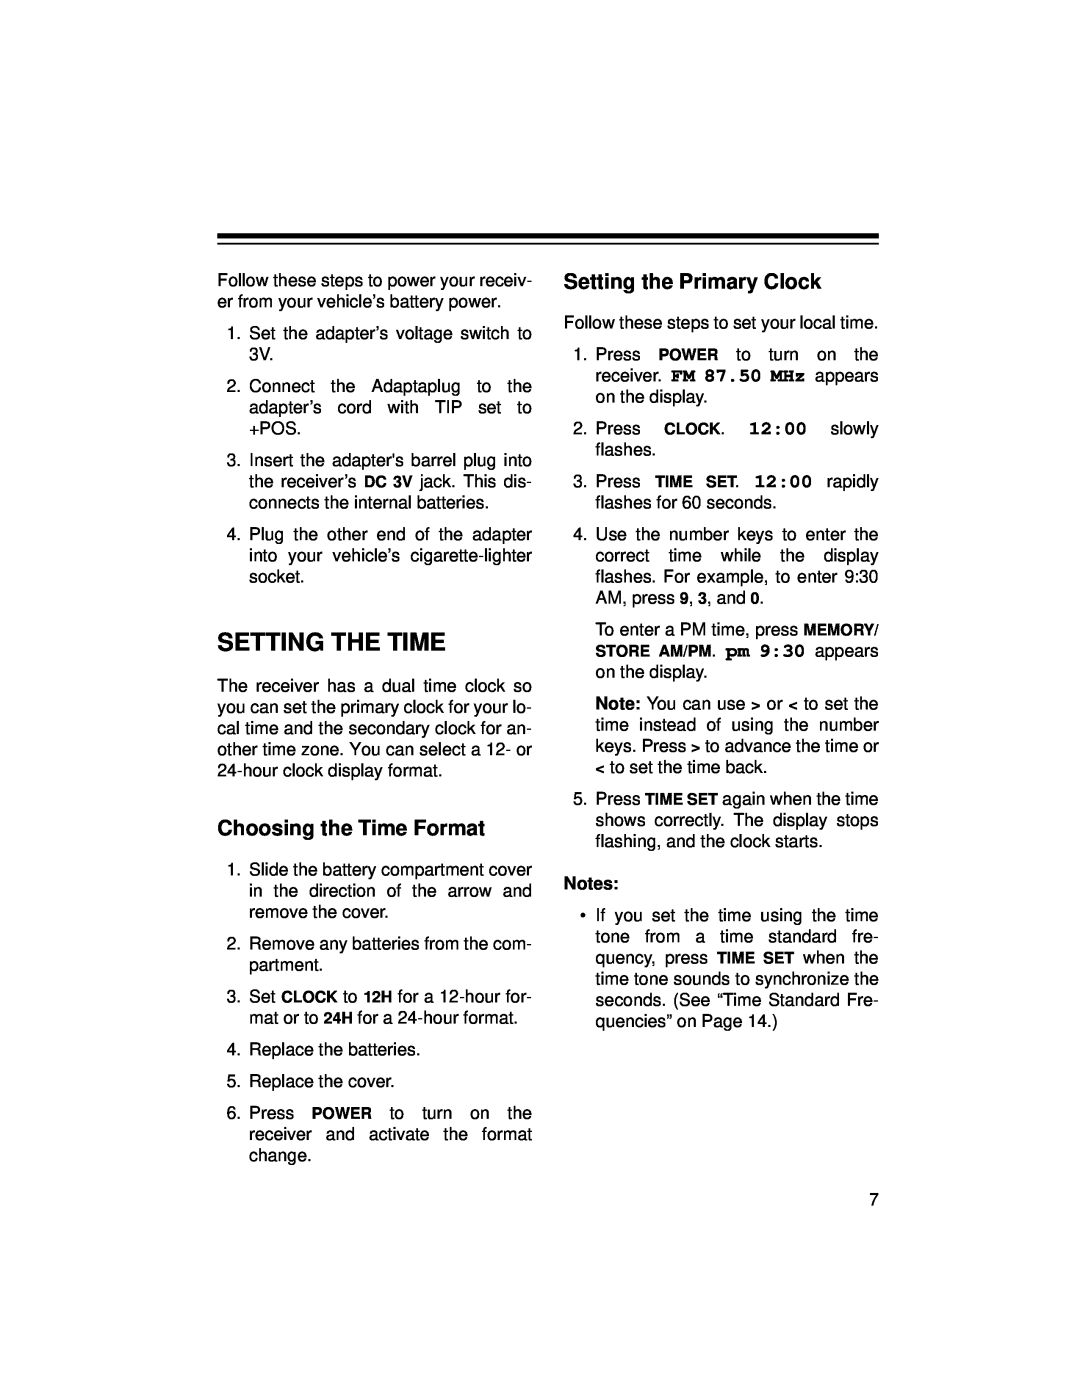 Radio Shack DX-396 owner manual Setting The Time, Choosing the Time Format, Setting the Primary Clock 